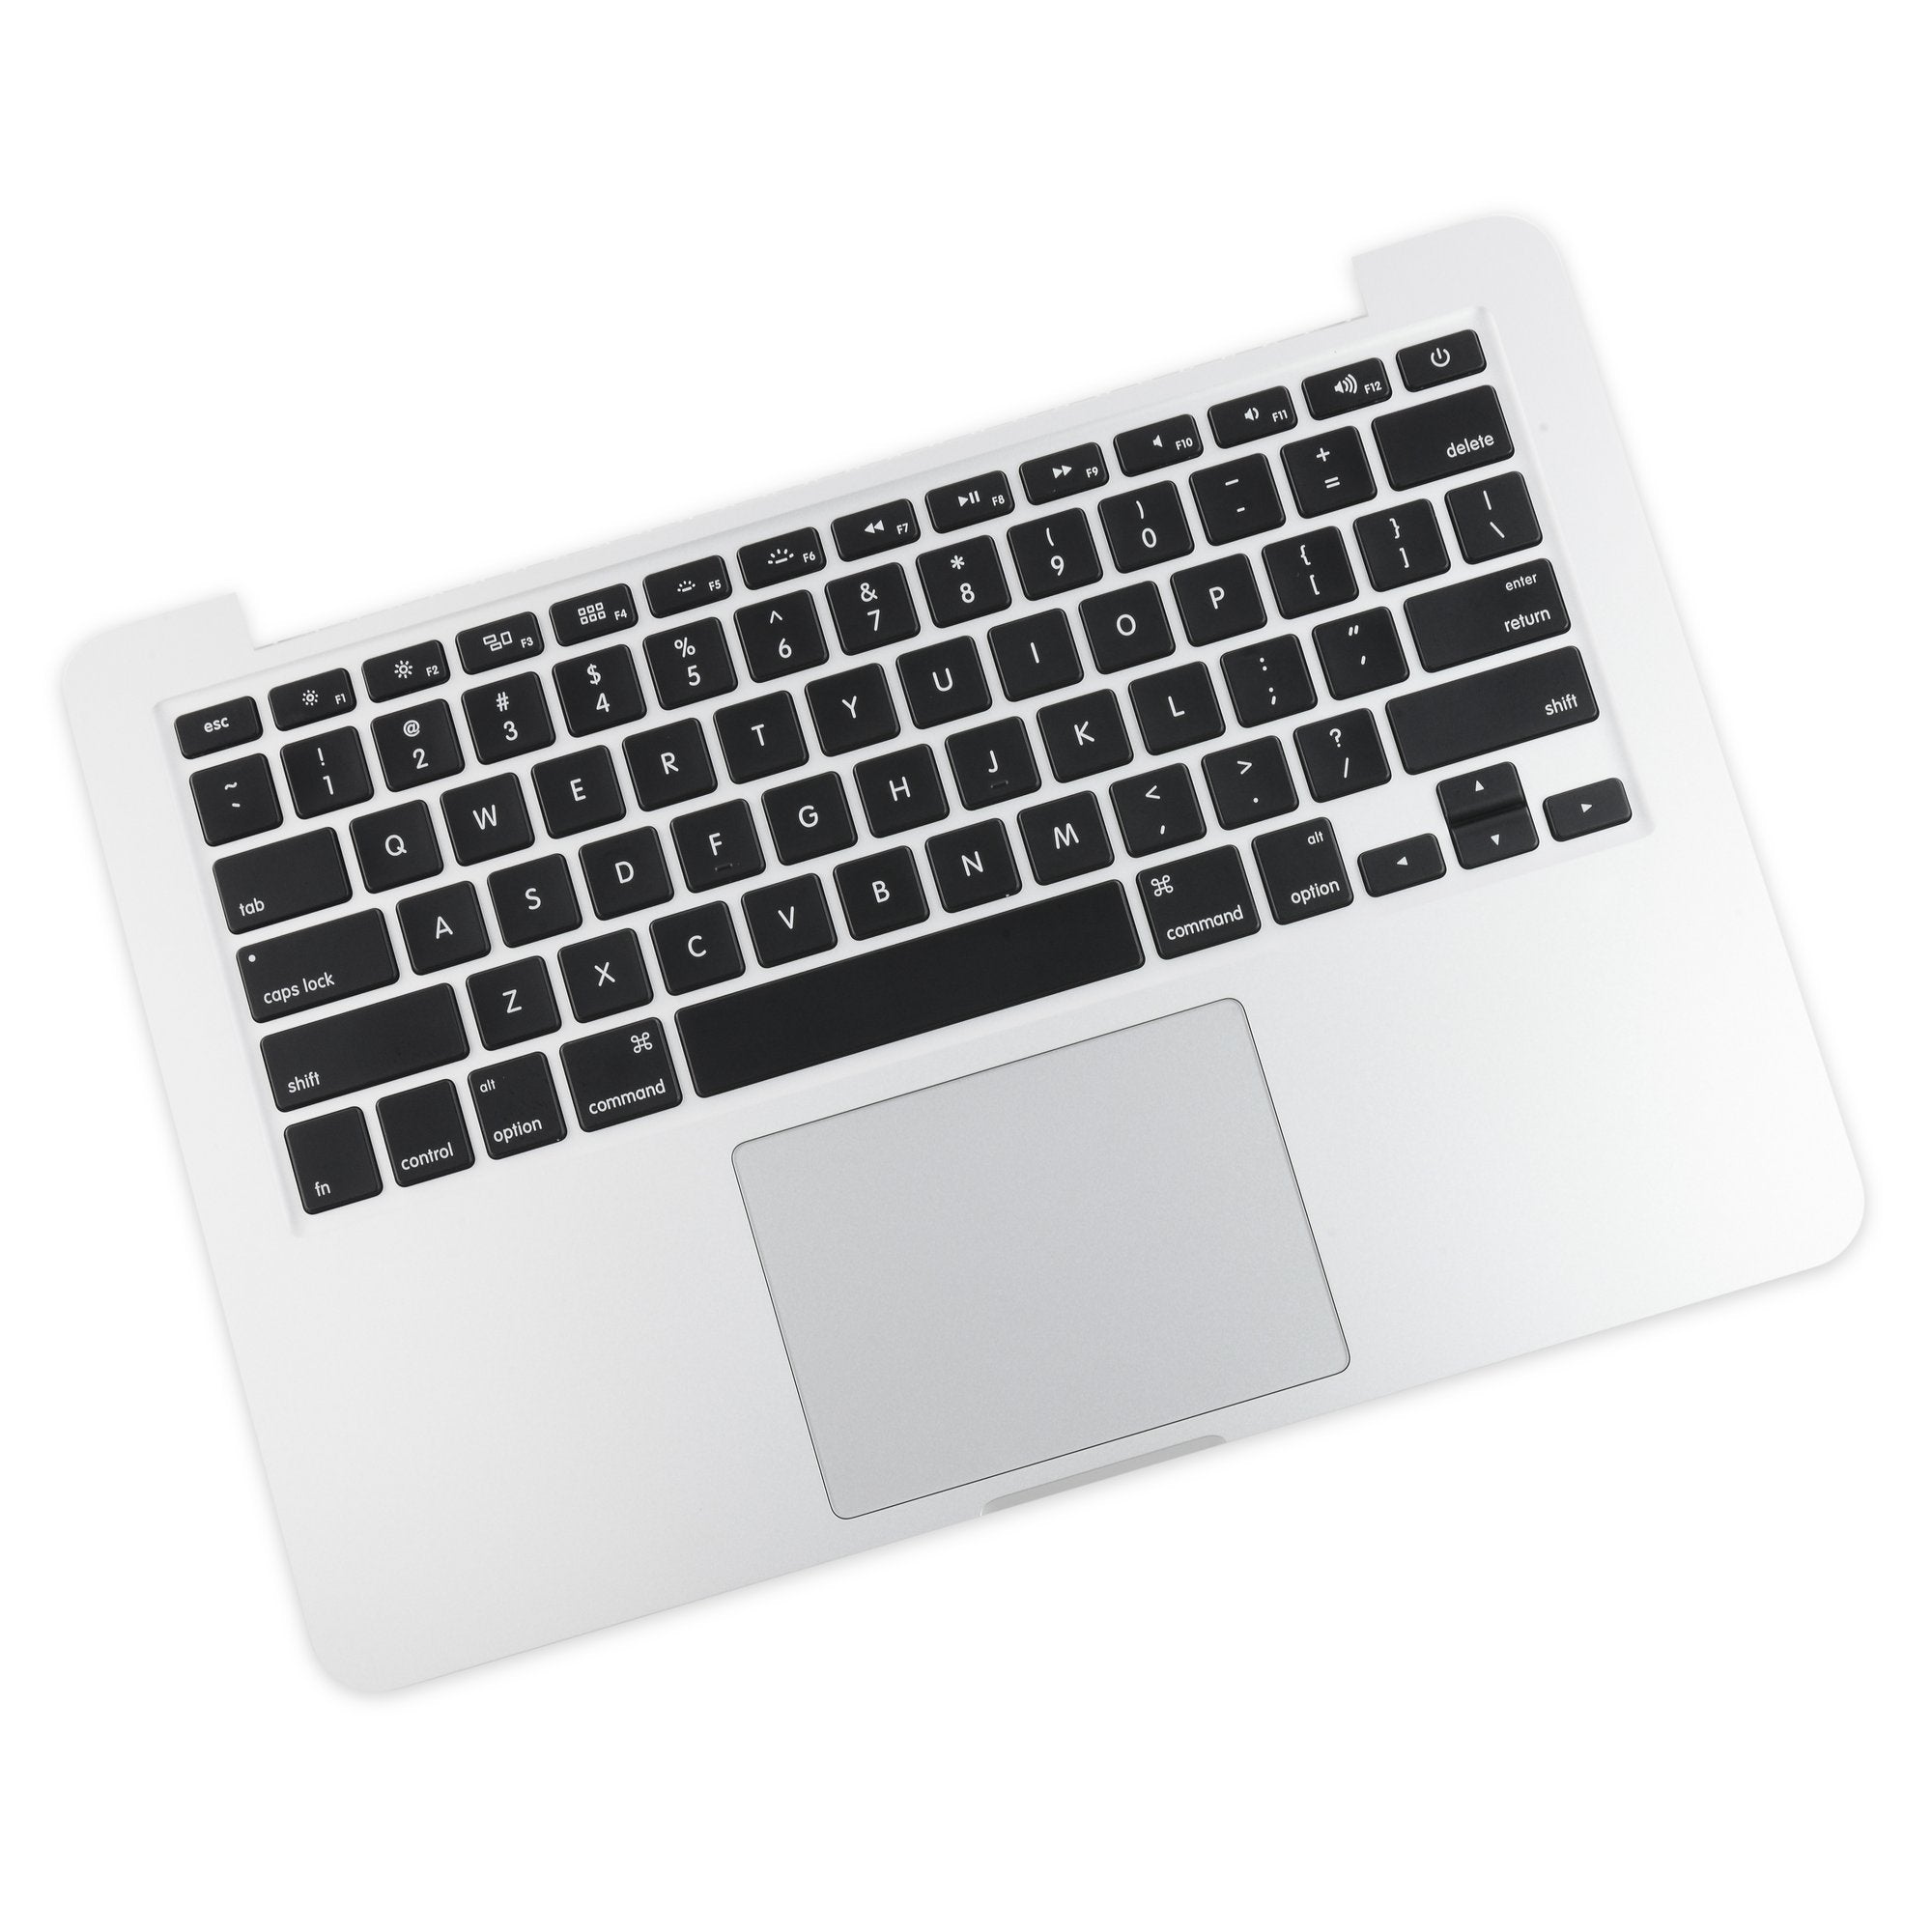 MacBook Pro 13" Retina (Early 2015) Upper Case Assembly